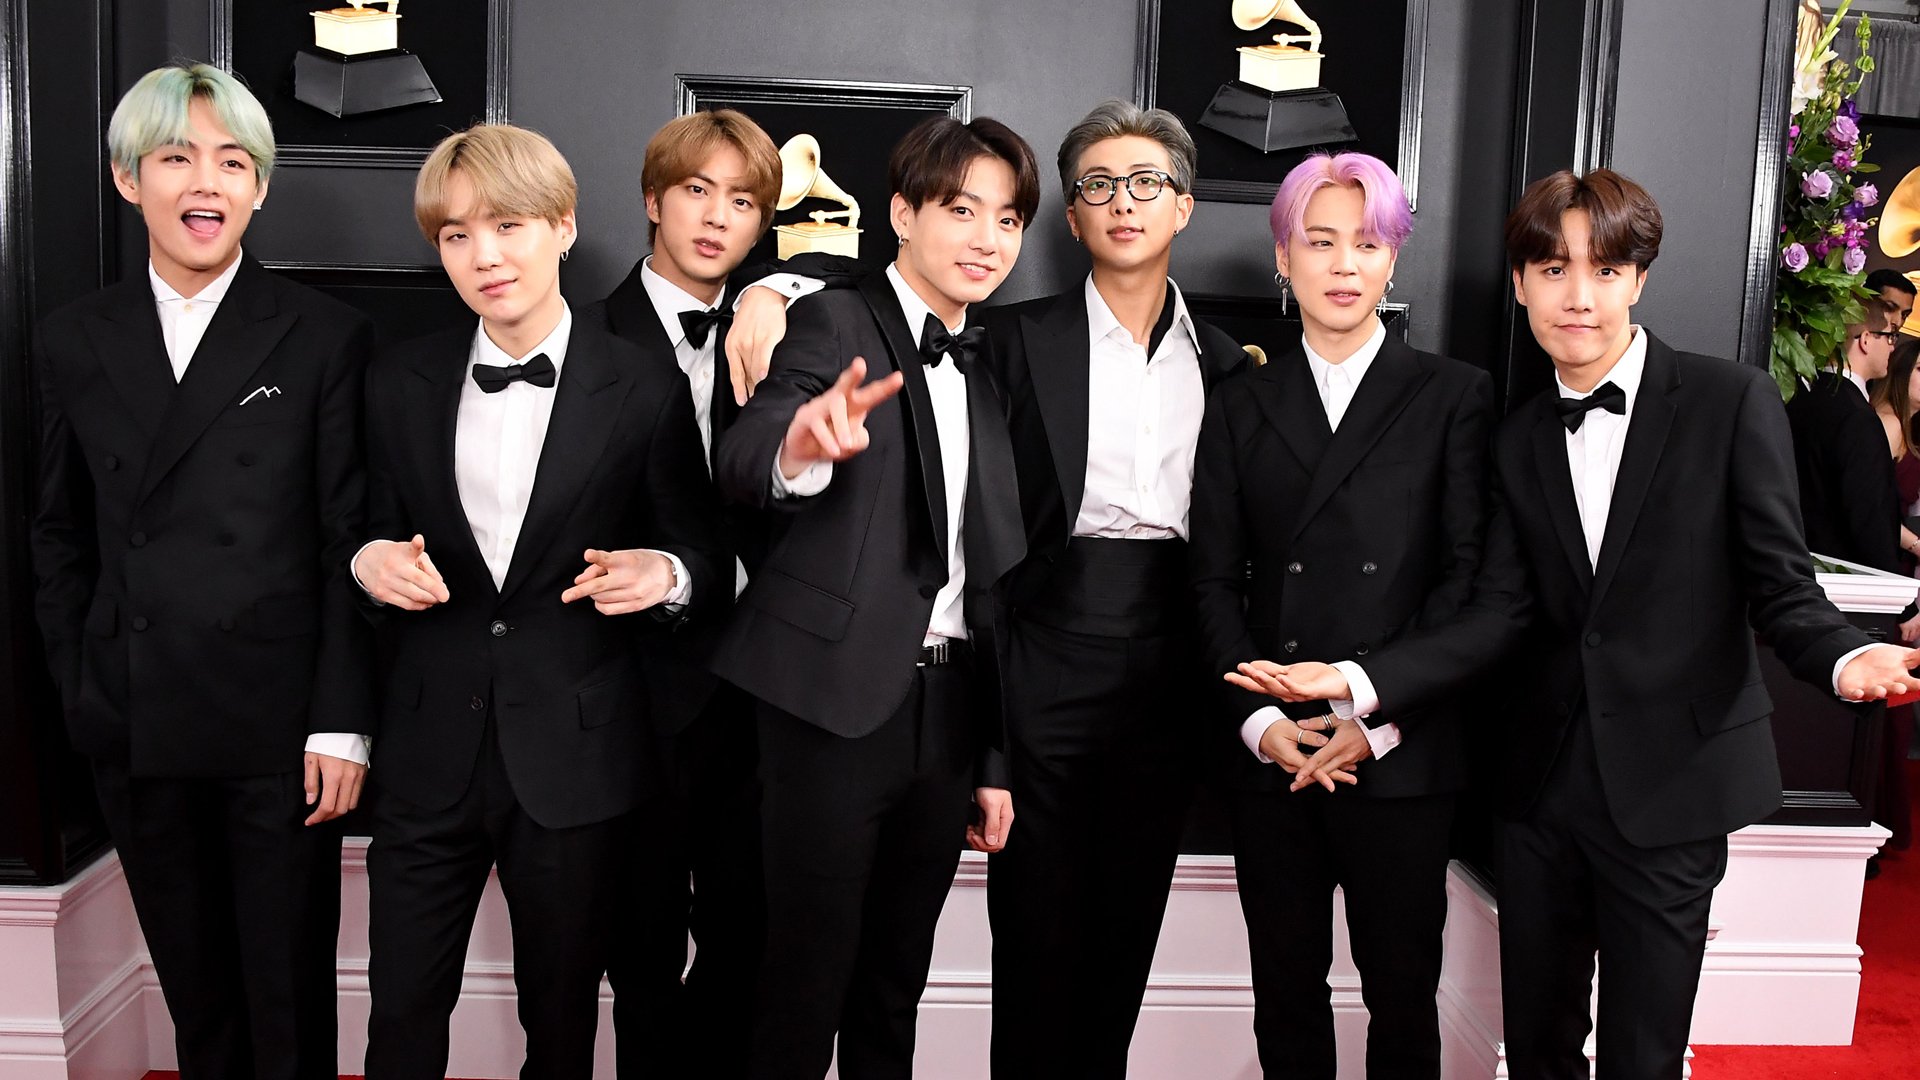 BTS arrives at the 61st Annual GRAMMY Awards at Staples Center on February 10, 2019 in Los Angeles, California.